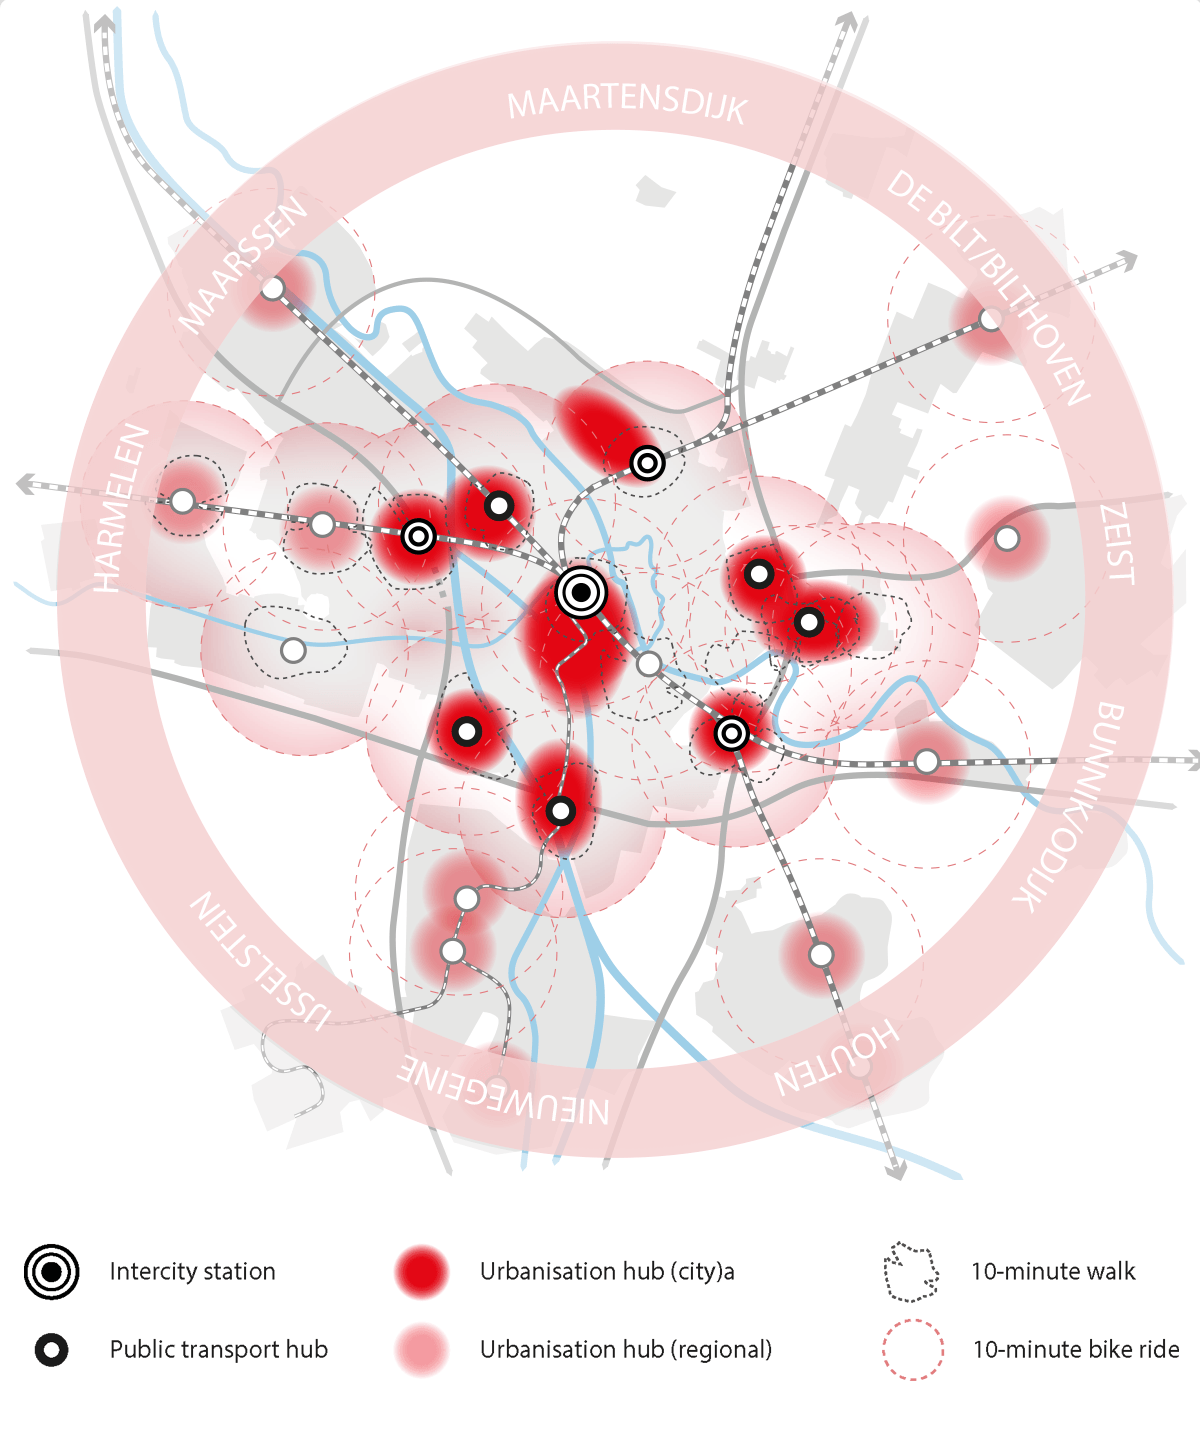 This image shows the locations we intend to develop into new hubs. This will turn Utrecht into a city with multiple centres.